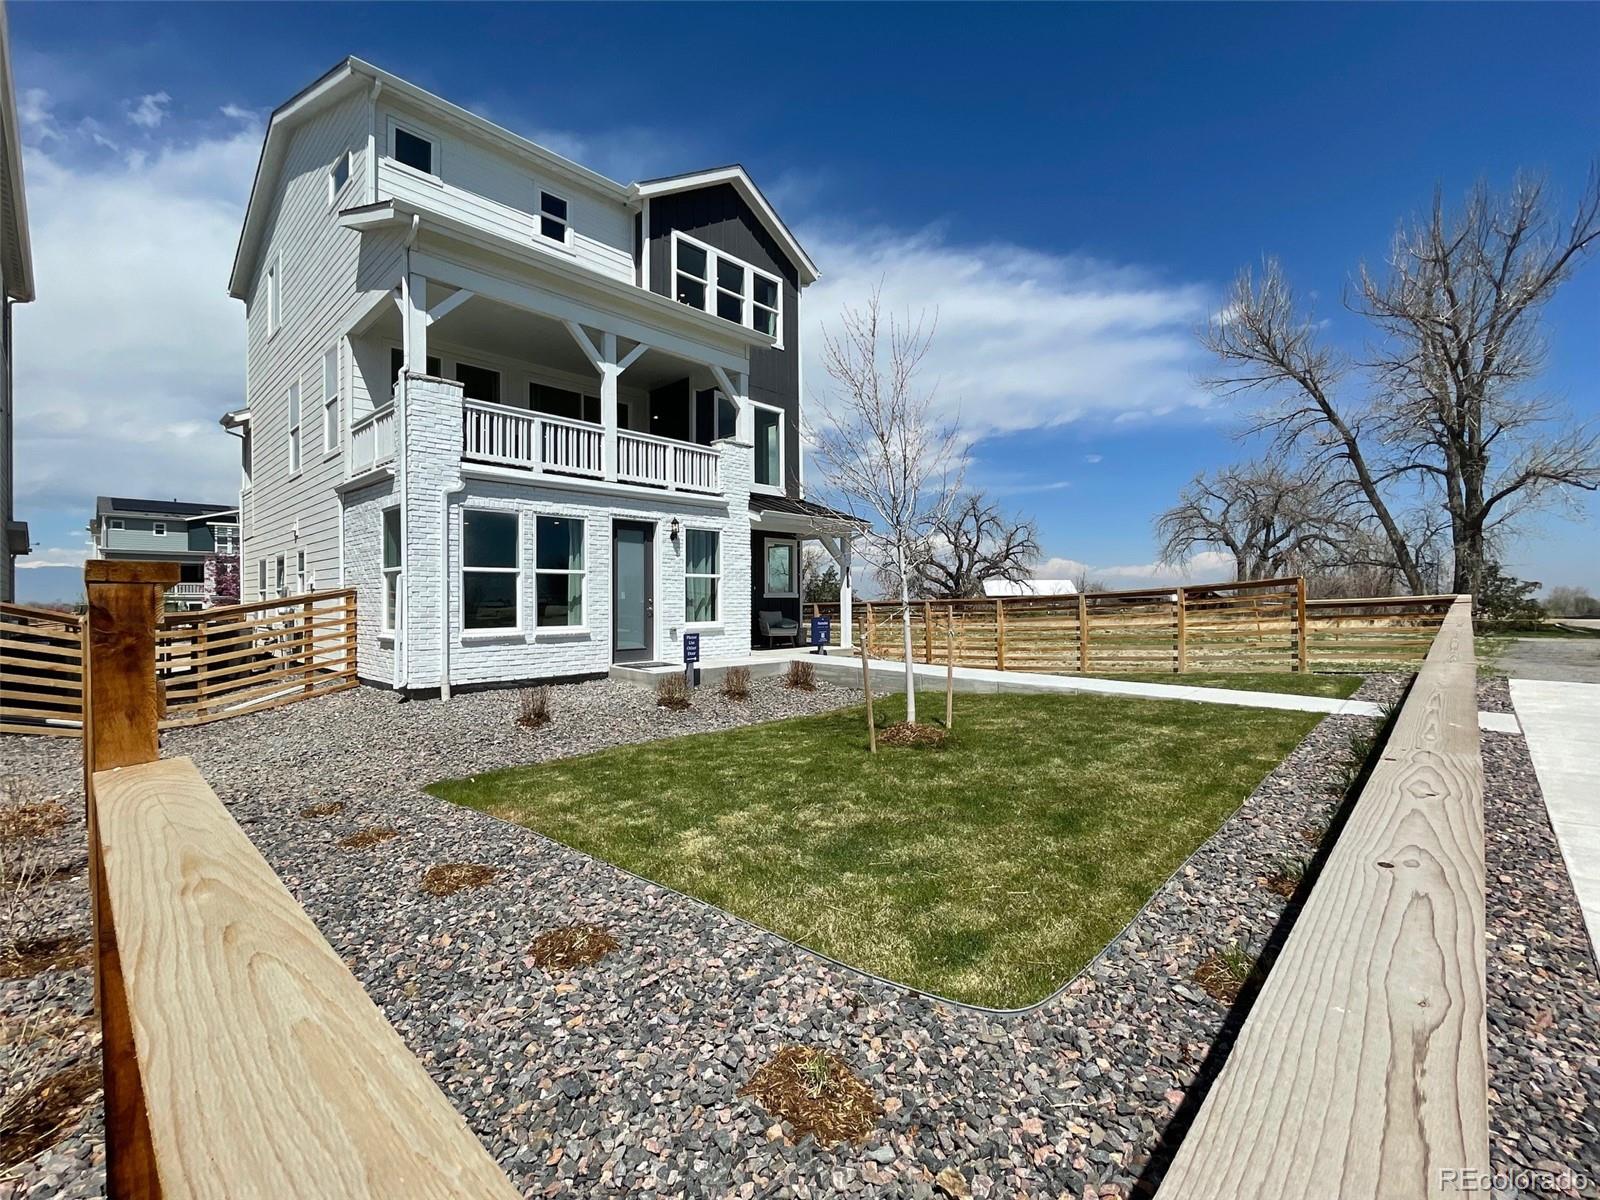 Report Image for 1447  Timber Trail,Lafayette, Colorado